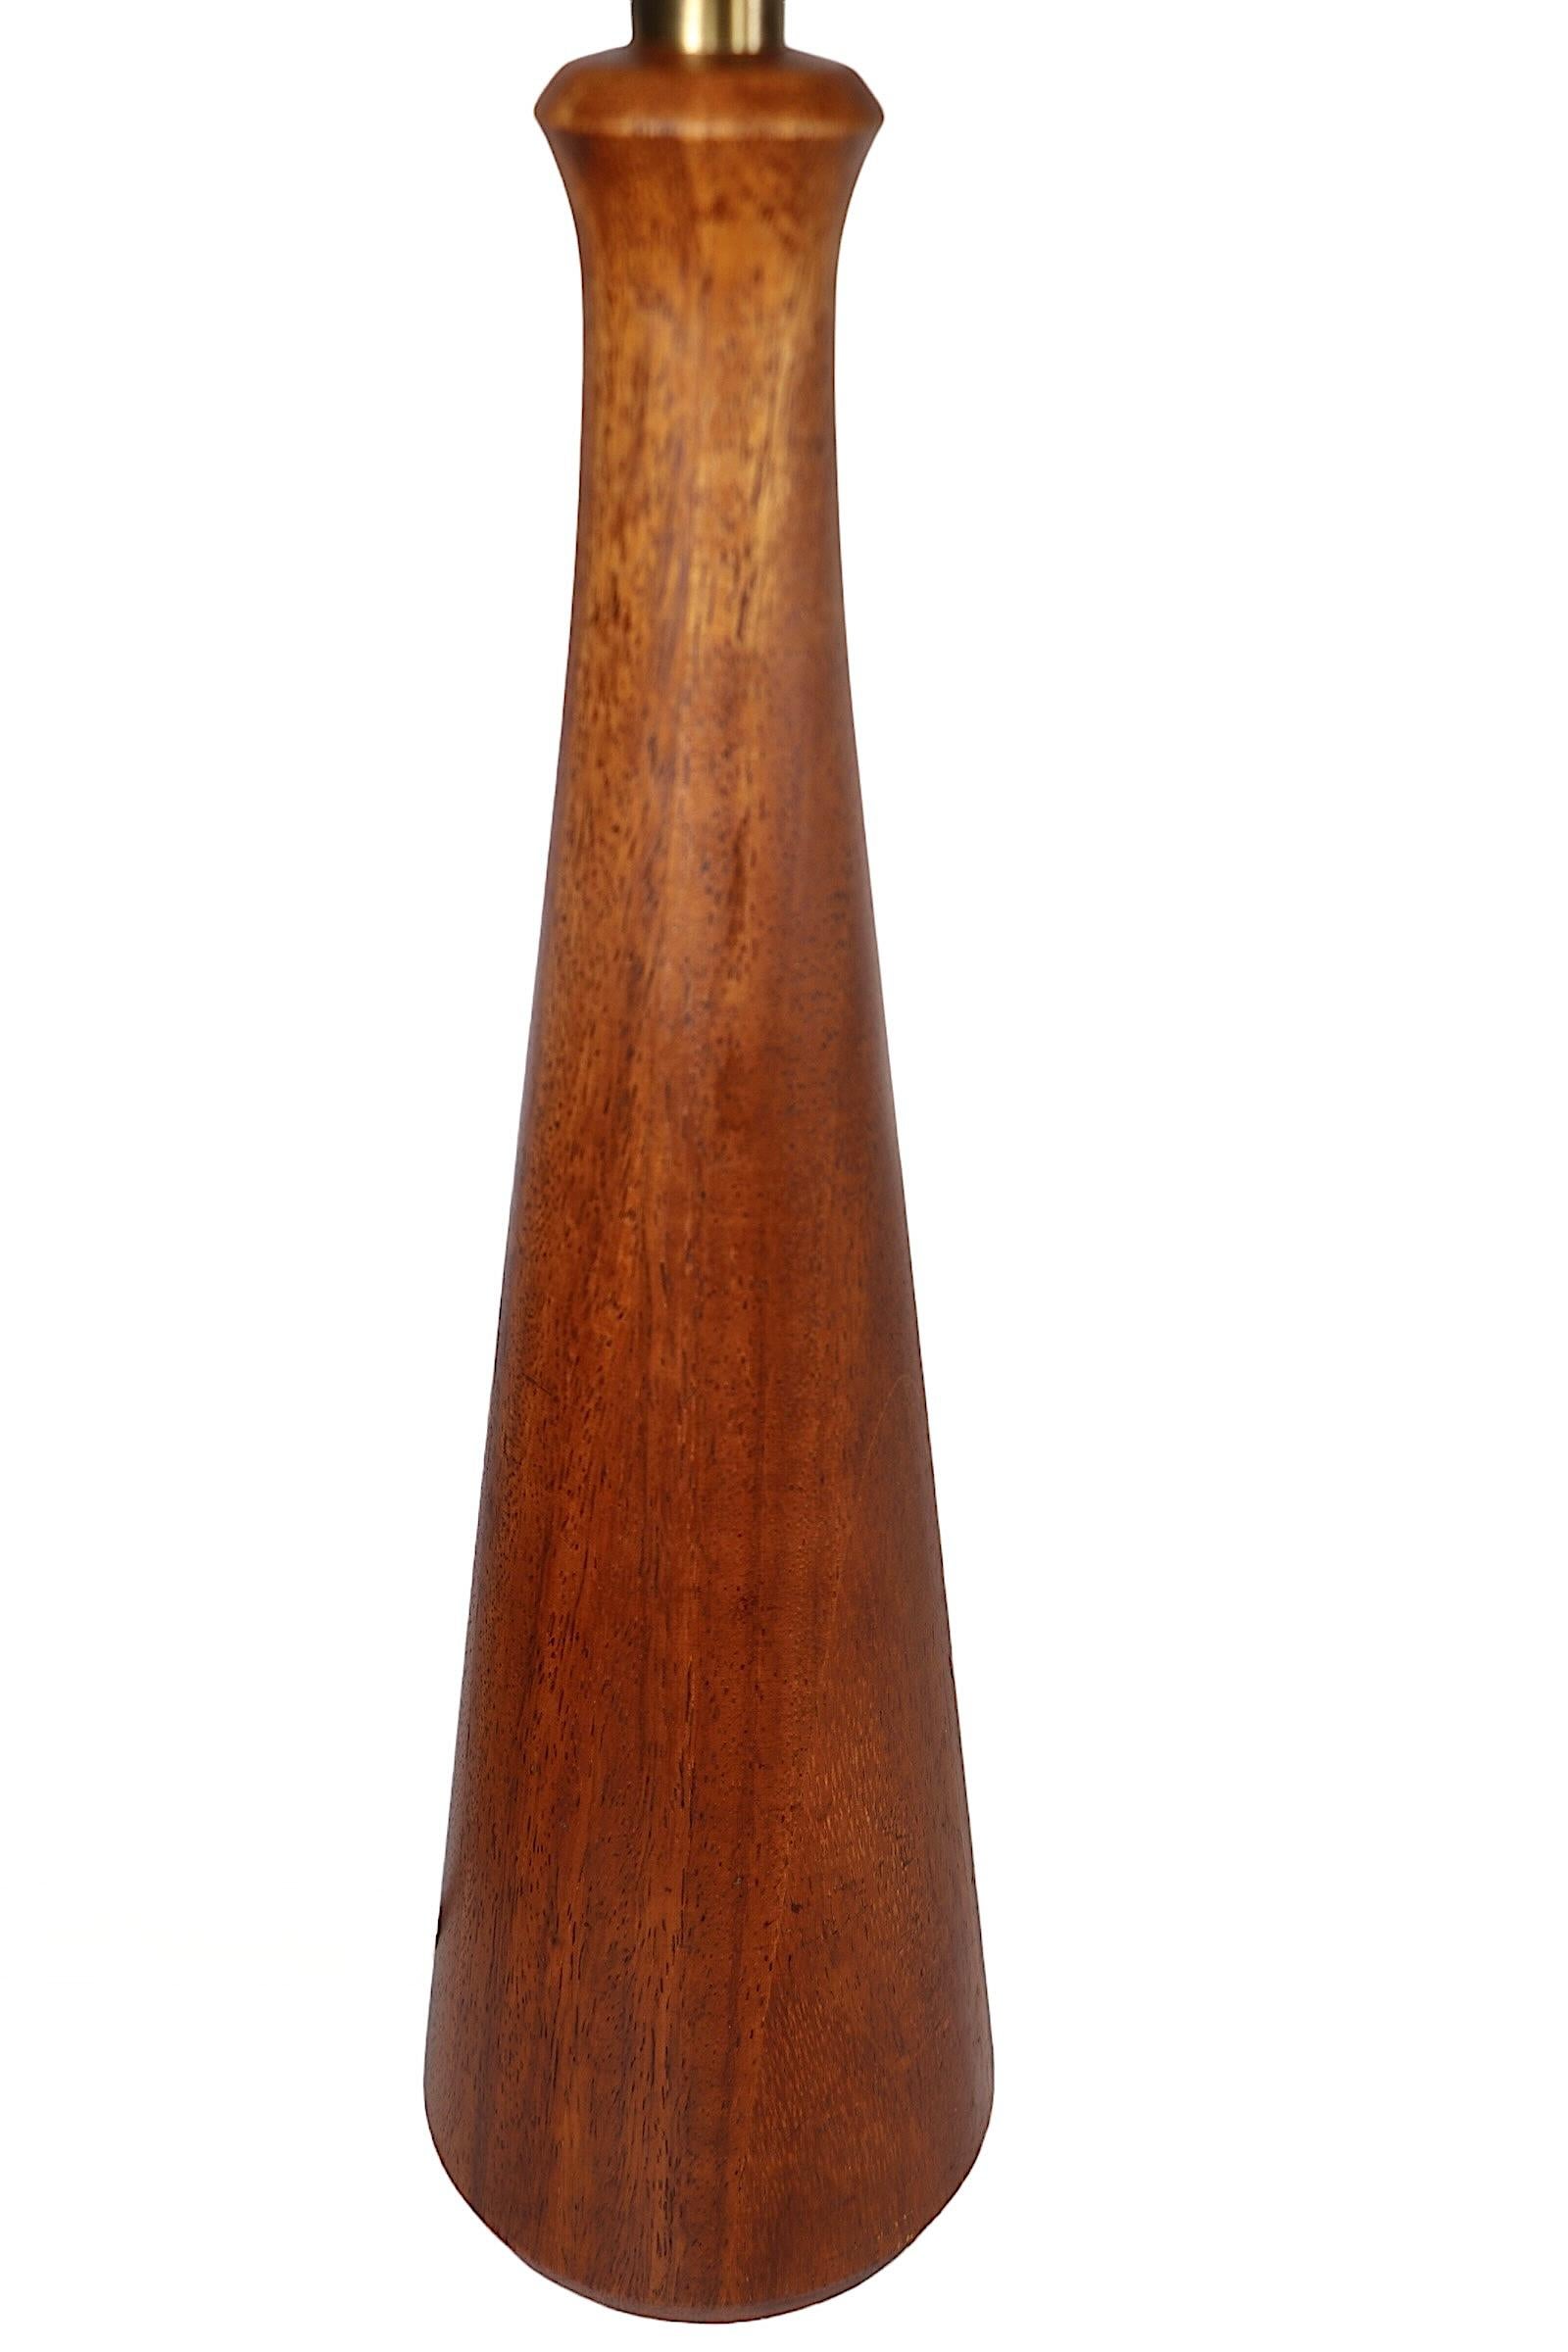  Danish Style Mid Century Wood Table Lamp c 1950/60's For Sale 1